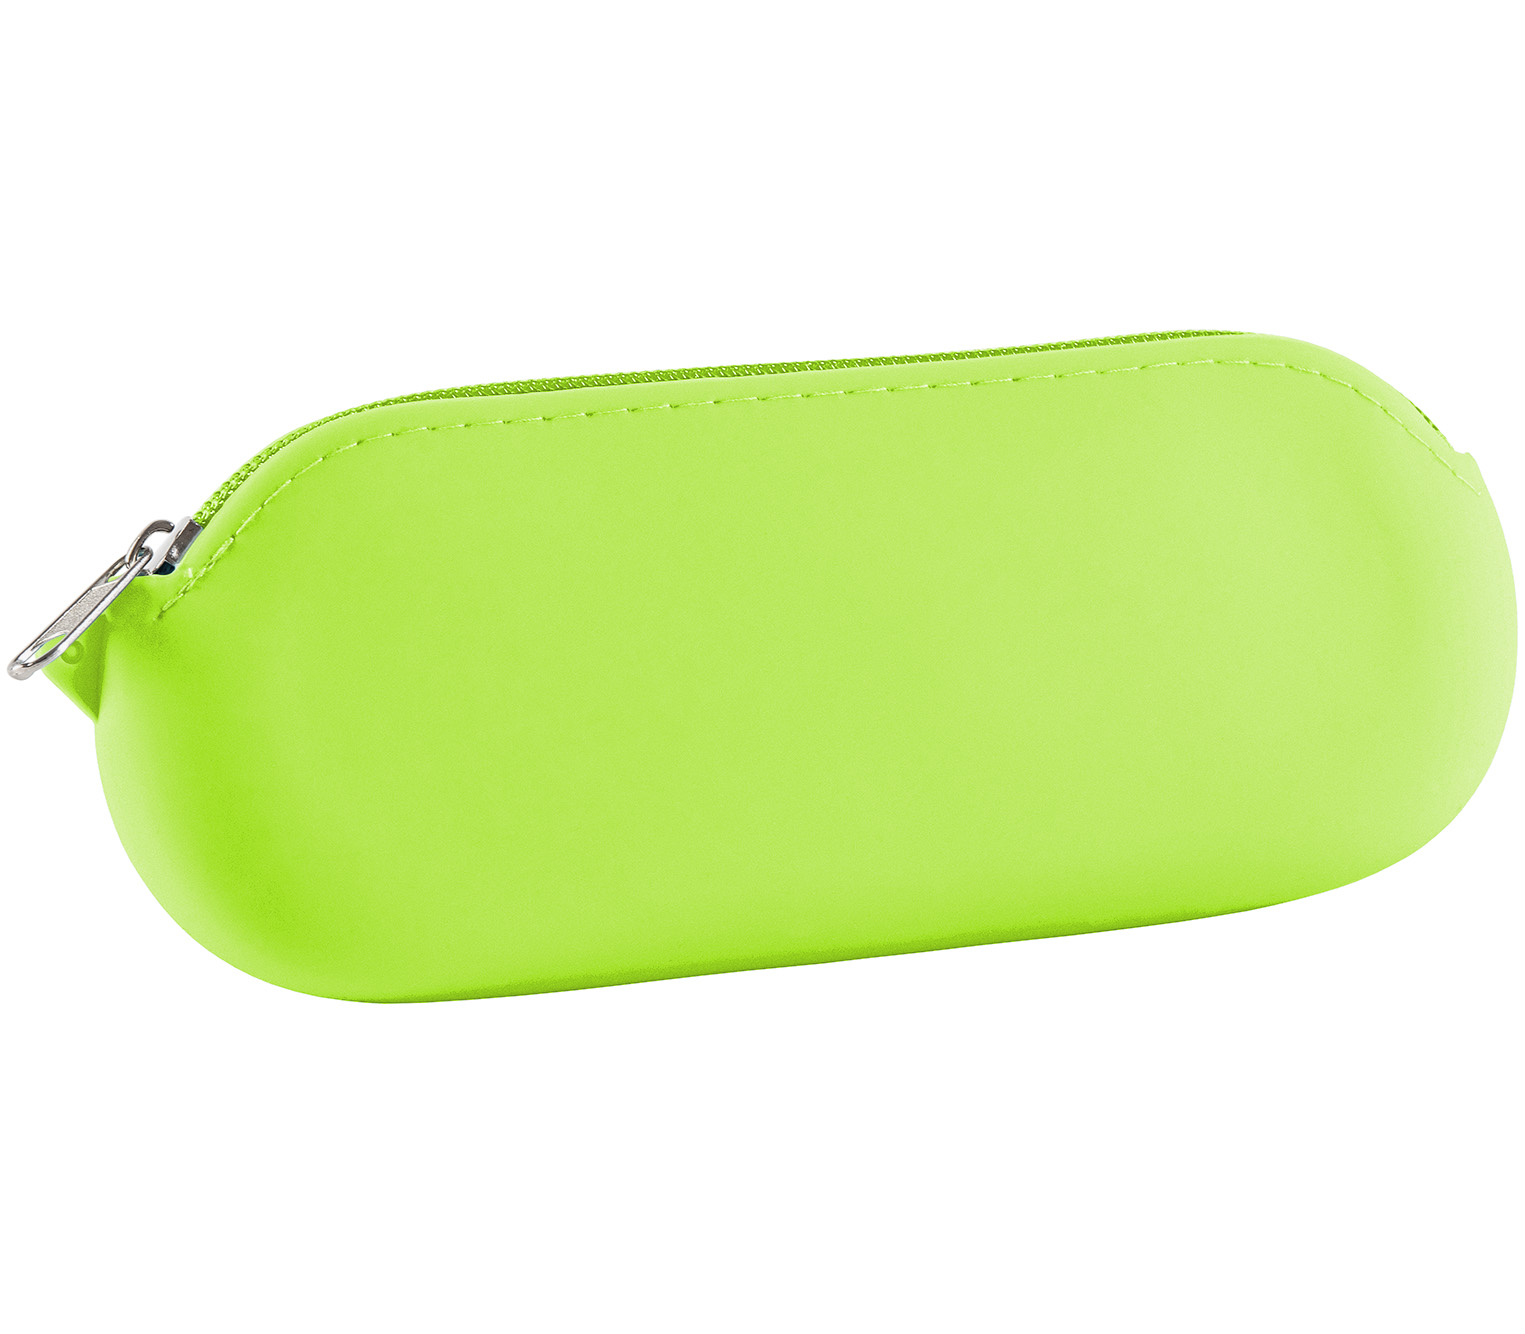 Main Image (Angle) - Buzz (Green) Glasses Cases Accessories